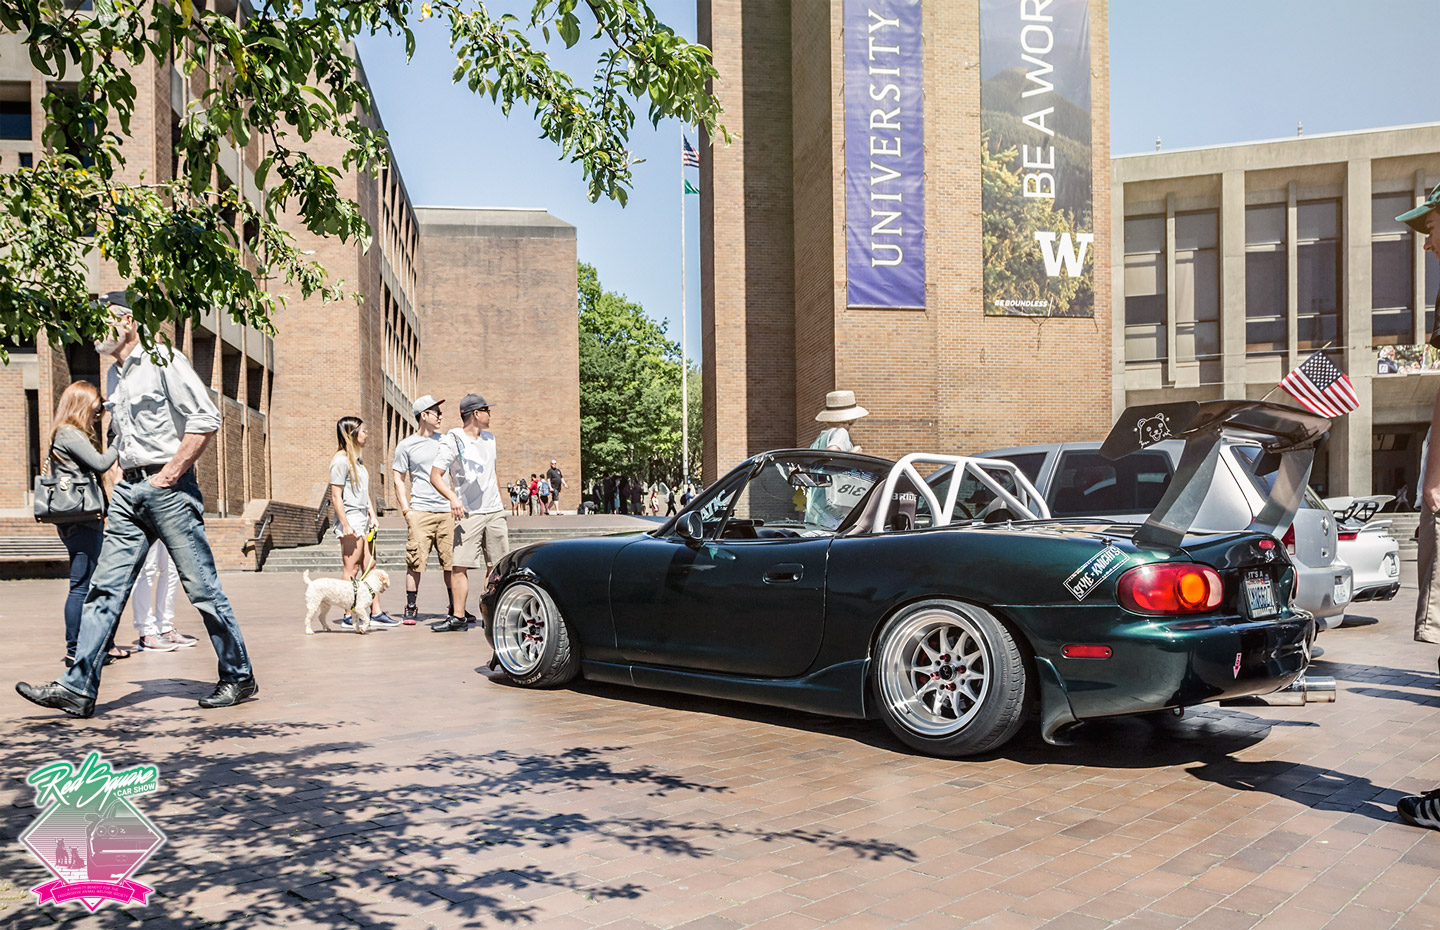 Red-Square-Car-Show-9-UW-Charity-Benefit-PAWS-org-Miata-huge-wing-s